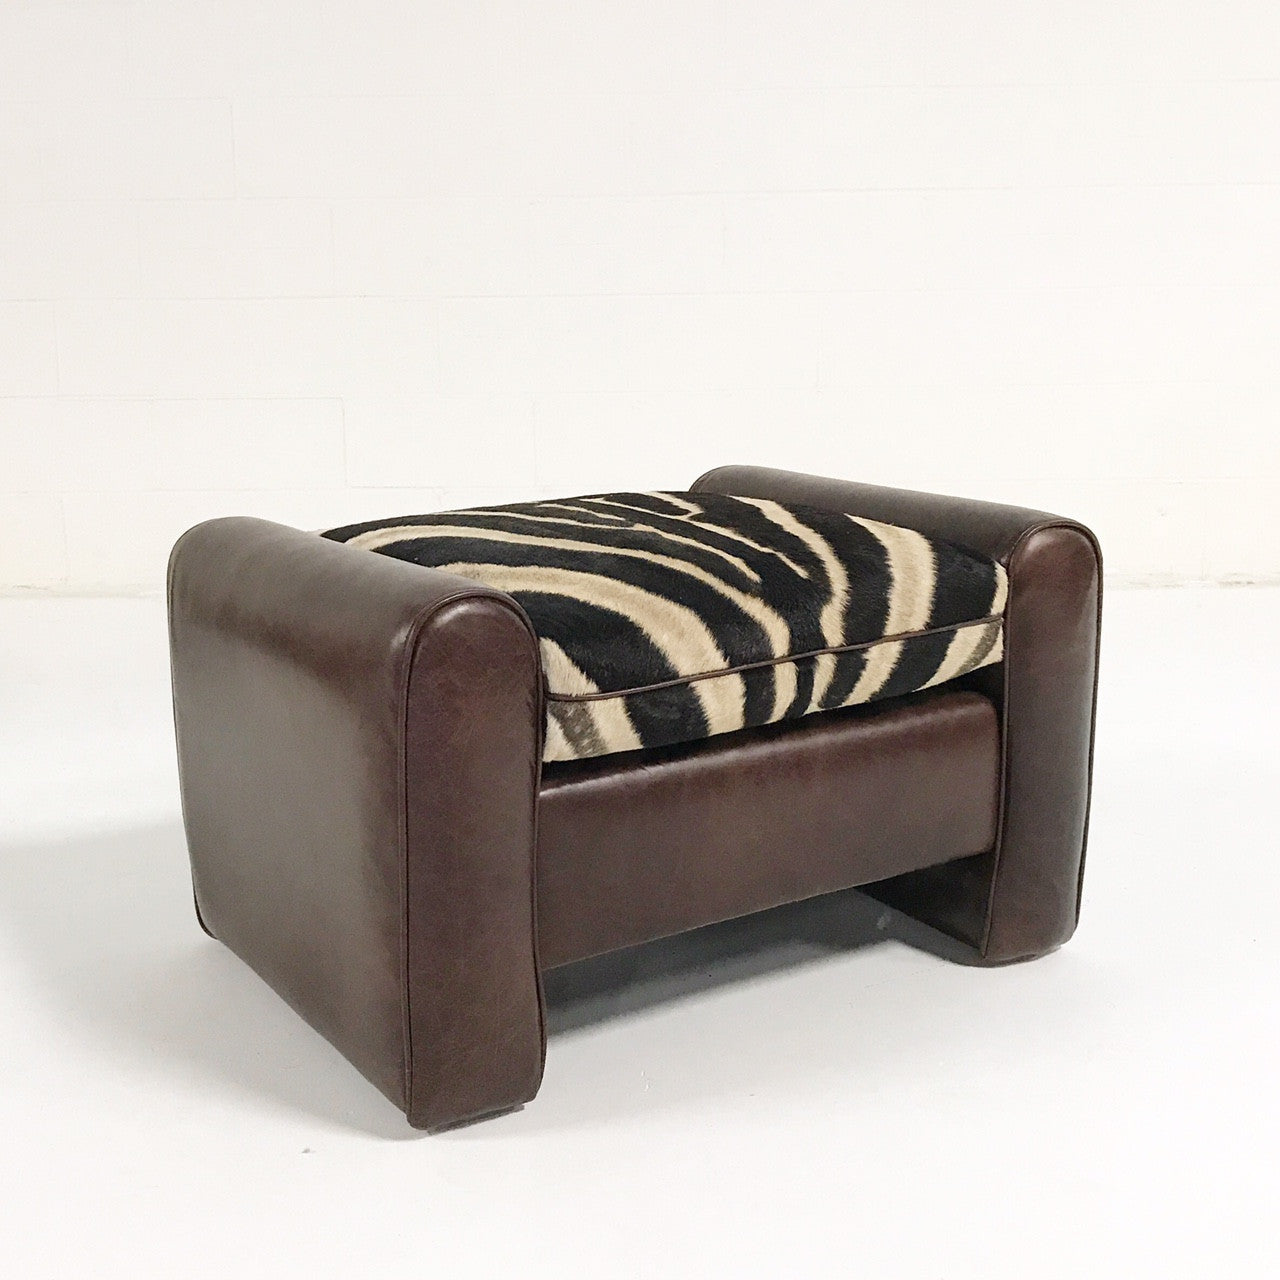 Vintage Ottoman Restored in Leather with Zebra Hide Cushion - FORSYTH